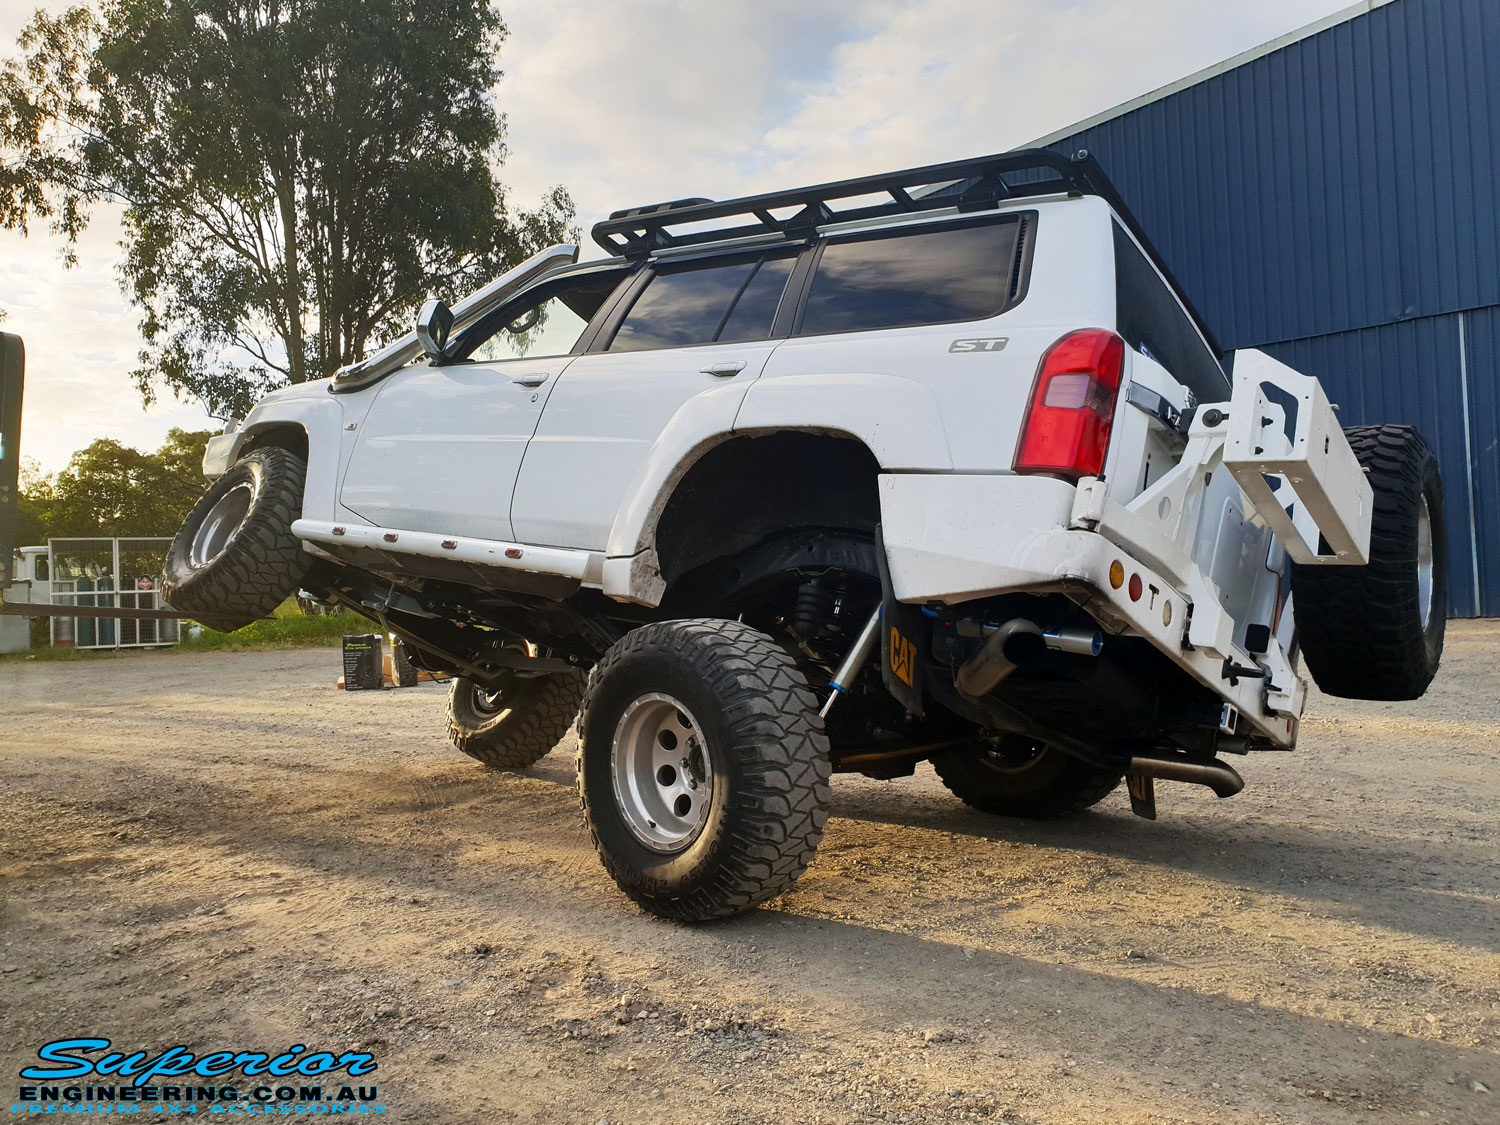 Left rear view of a White Nissan GU Patrol Wagon flexing its front left wheel after the fitment of a range of high quality Superior Engineering 4x4 Suspension & Accessories